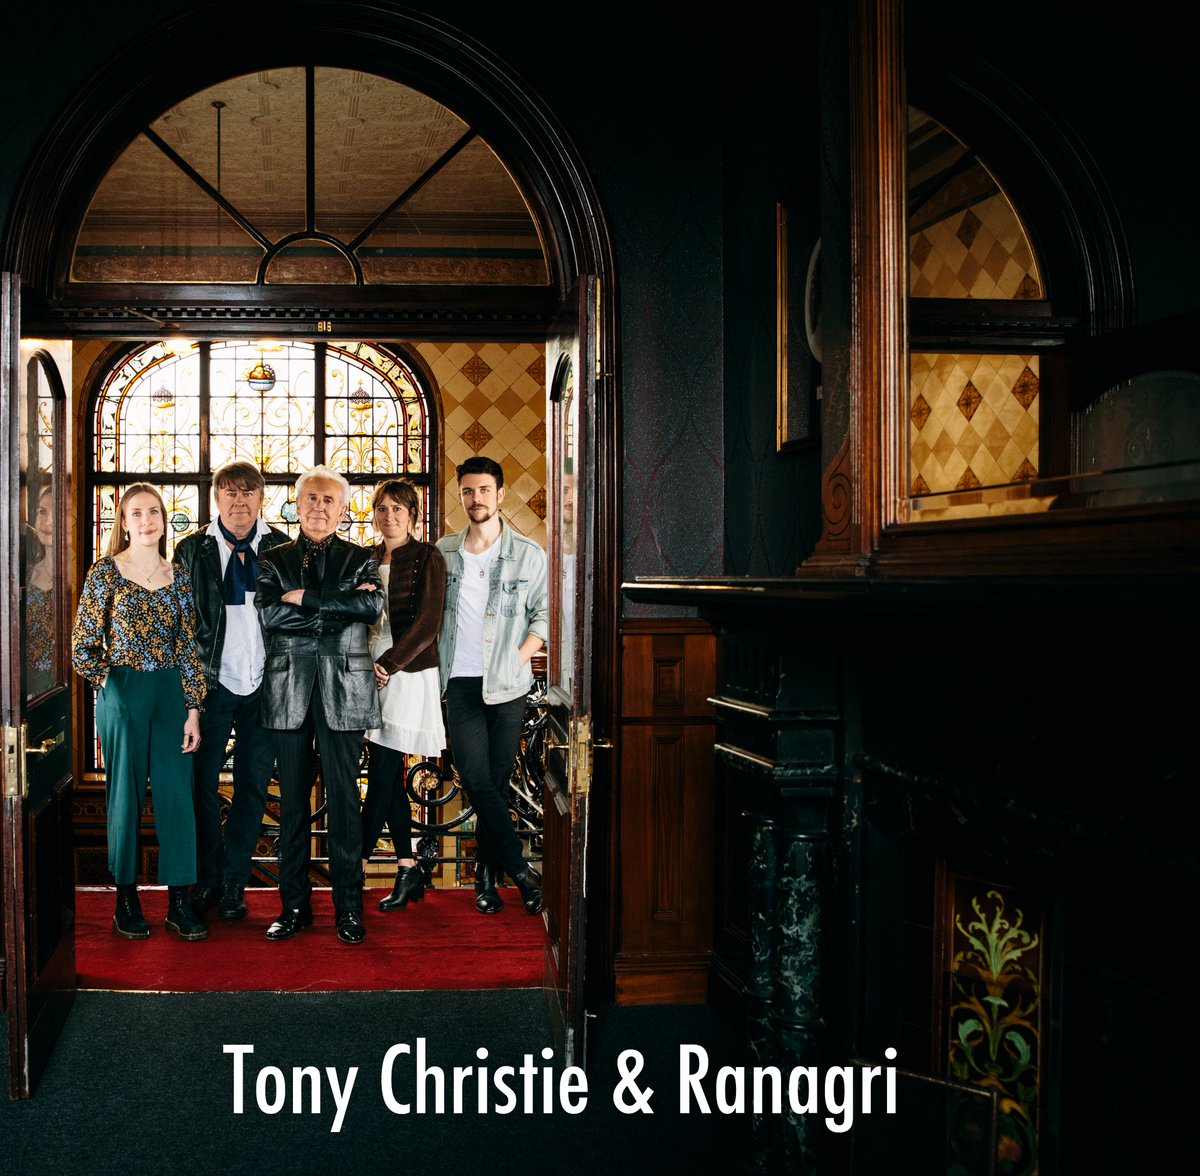 We have the greatest pleasure in announcing that we are again teaming up with the legend that is Tony Christie for a limited series of concerts in November/December celebrating our mutual love for the songs & folklore of Ireland. Tickets hopping onto ranagri.com now!